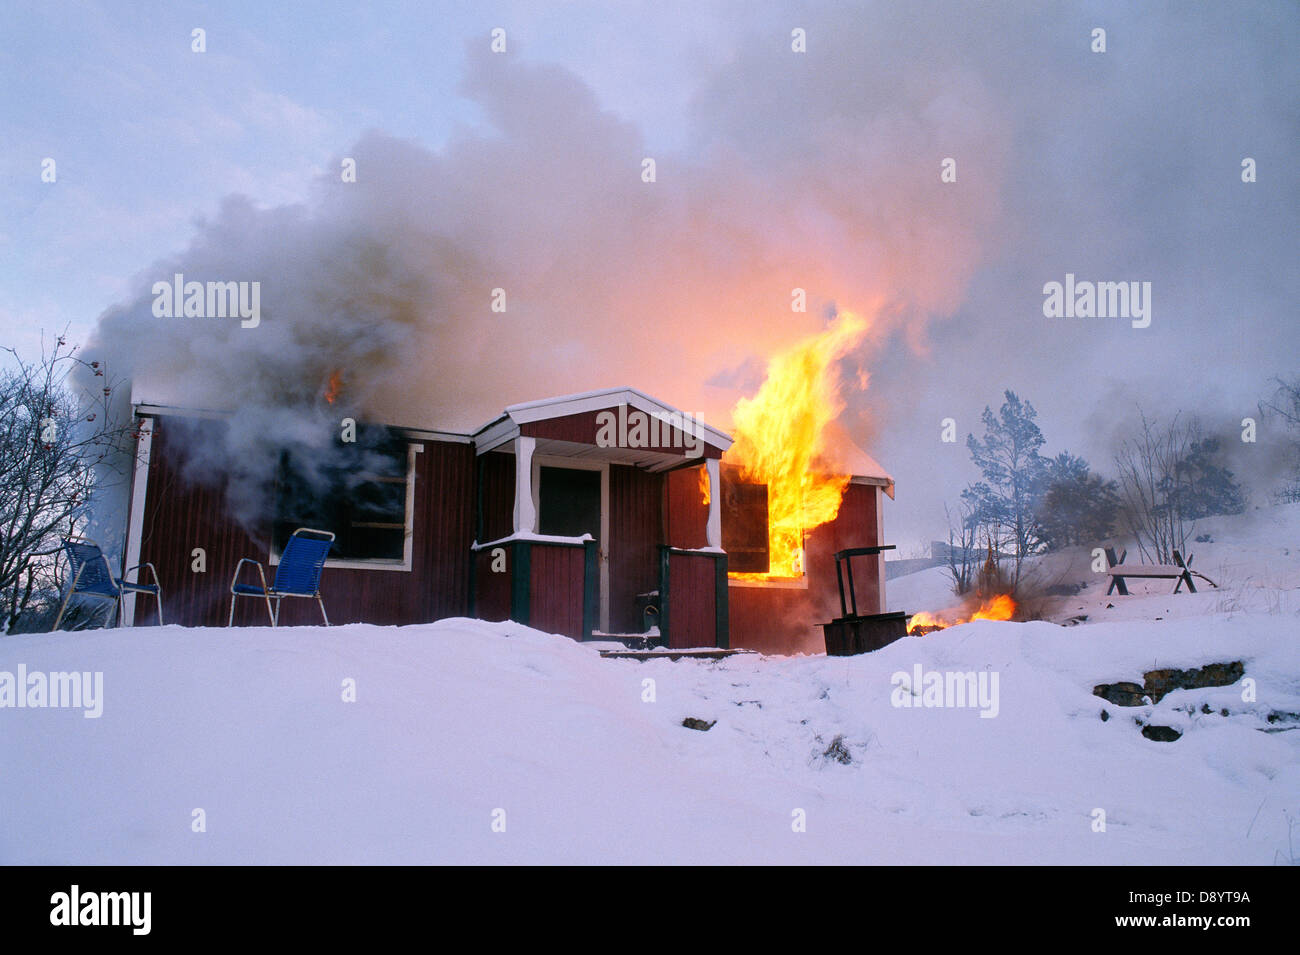 A house on fire. Stock Photo